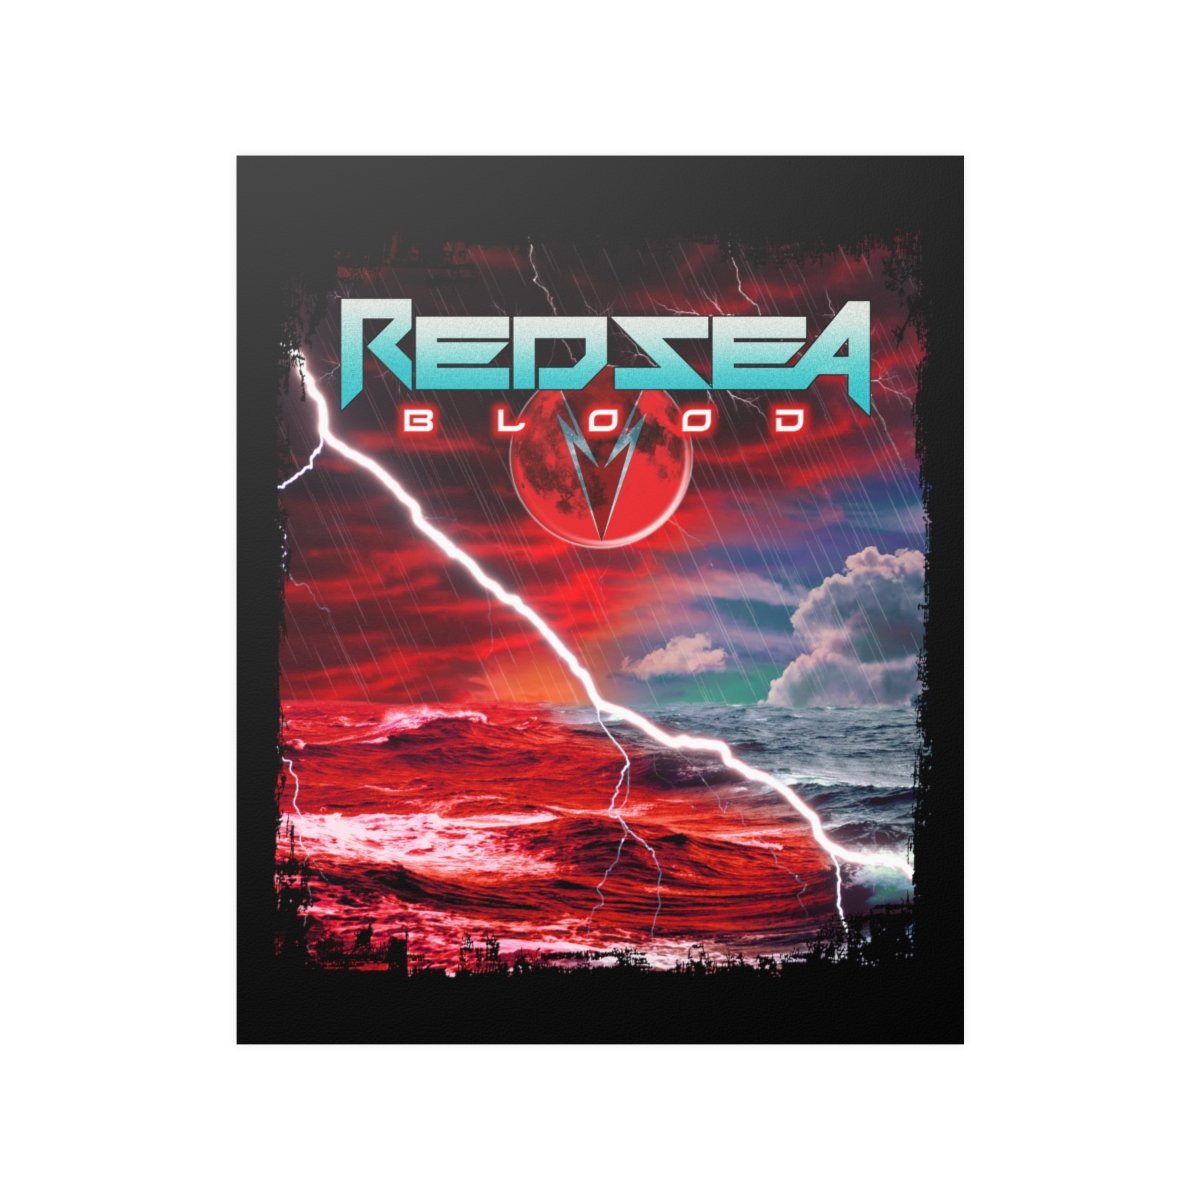 Red Sea – Blood Posters